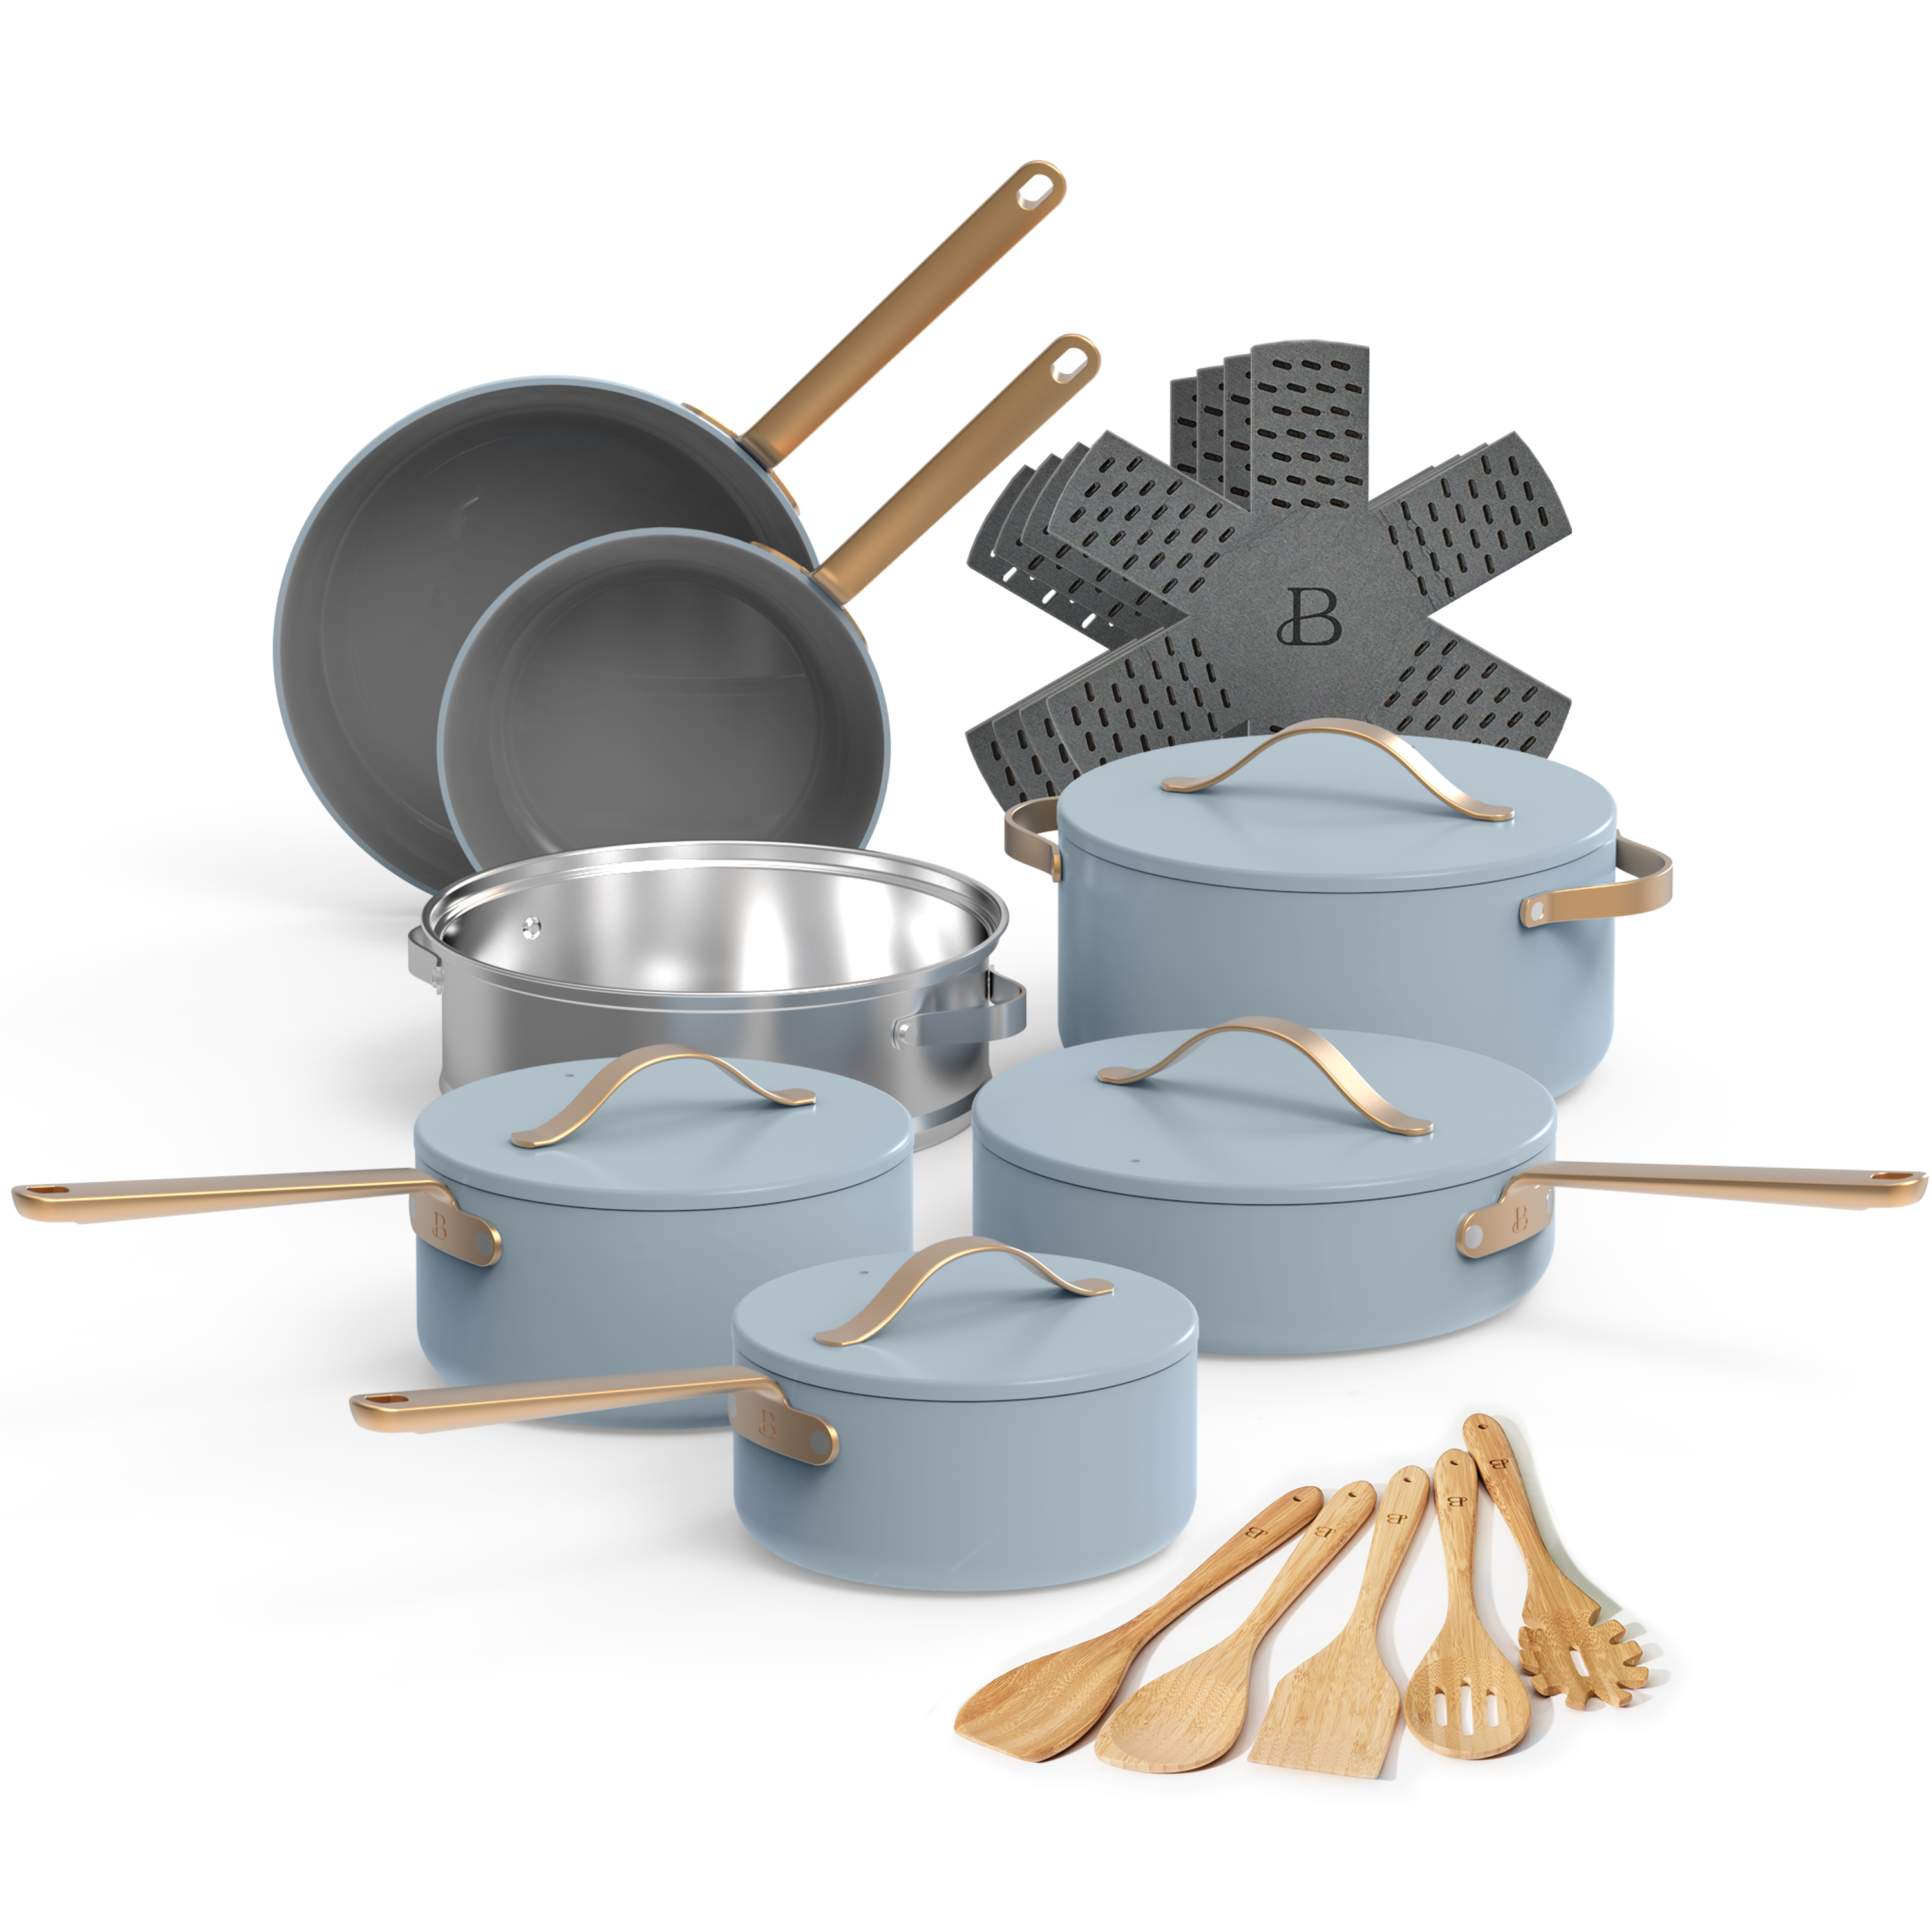 Beautiful 20pc Ceramic Non-Stick Cookware Set, Cornflower Blue by Drew Barrymore - image 1 of 7